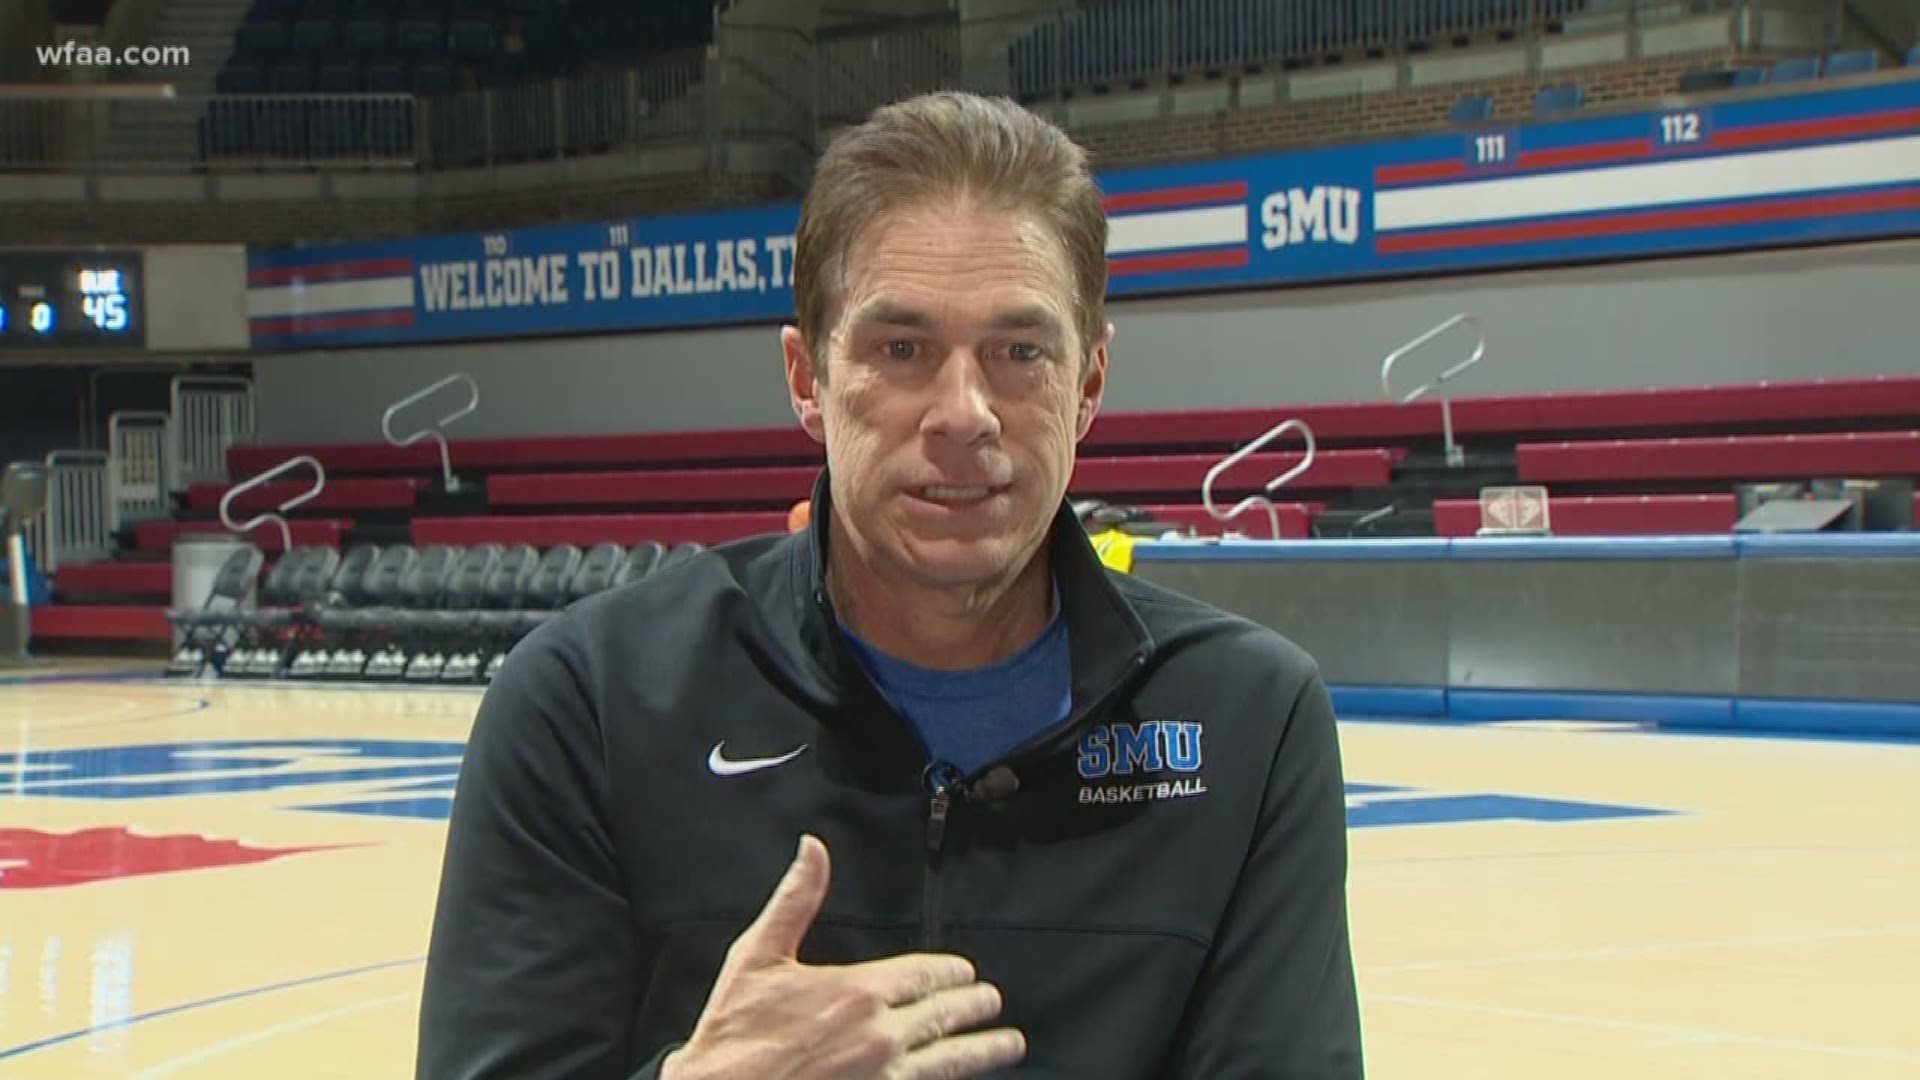 SMU head coach Tim Jankovich says, “when you touch hearts in that way, is there anything more powerful than that?”